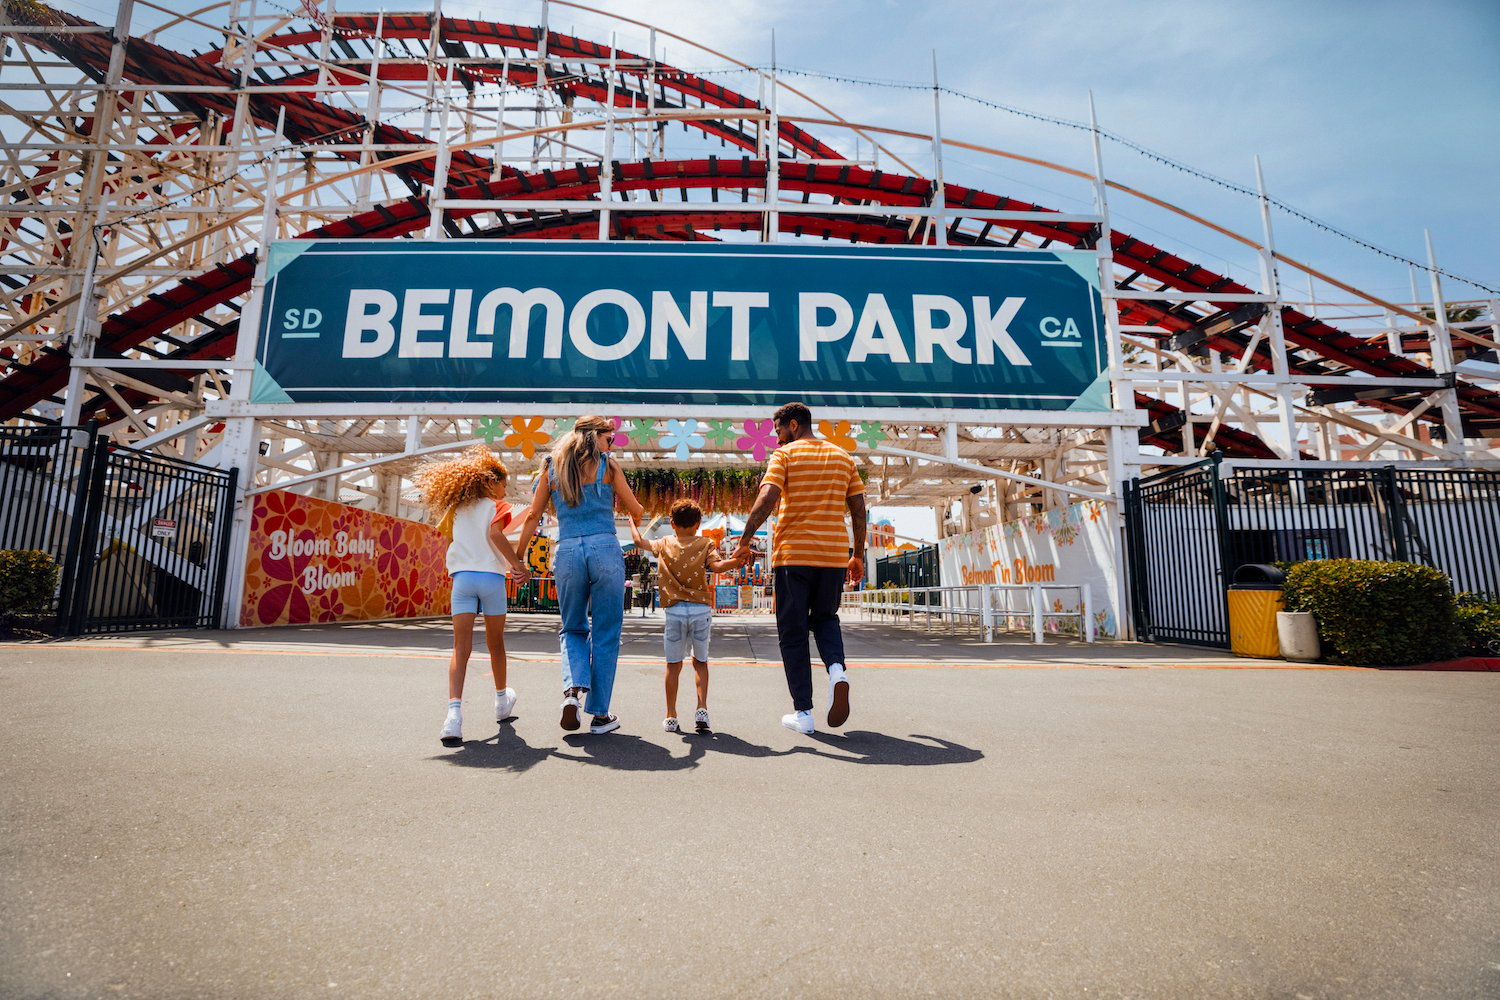 Fun things to do on Father's Day in San Diego including a day at Belmont Park, Mission Beach